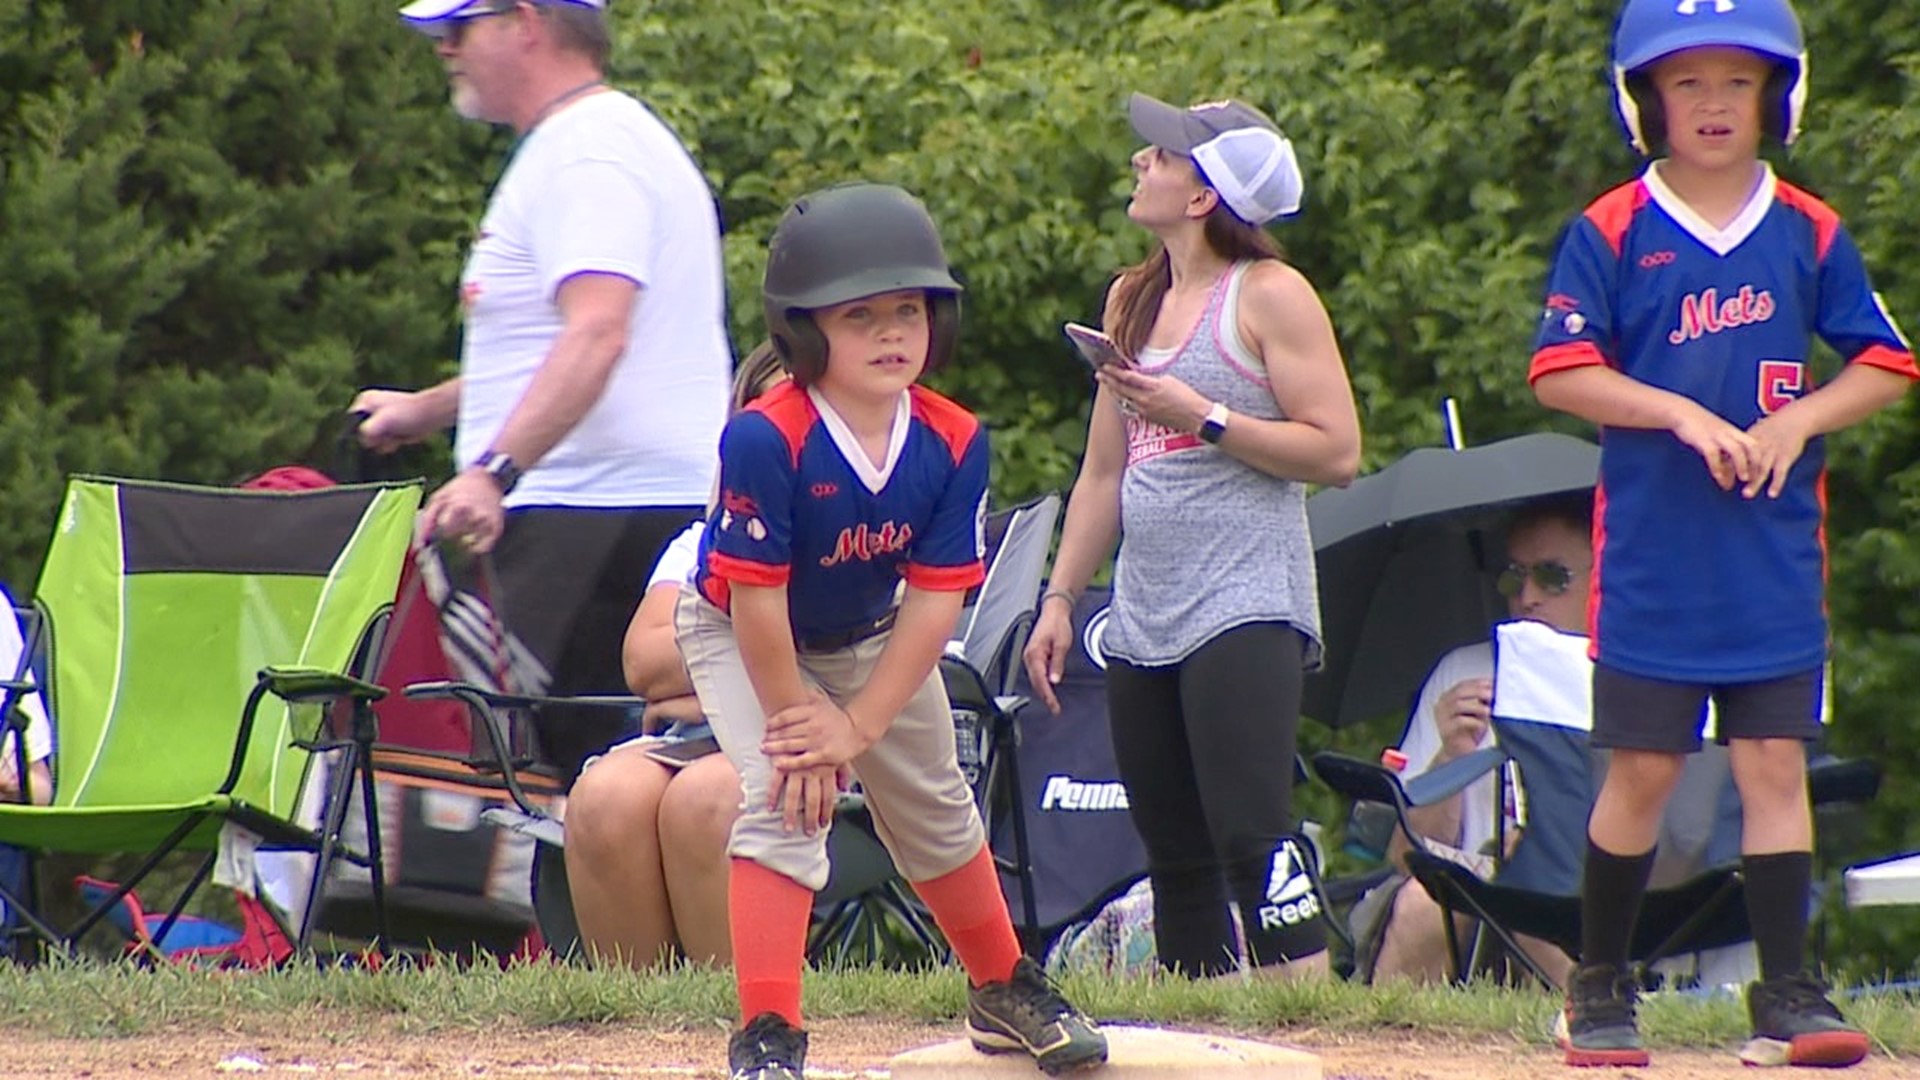 It was a busy day as Southern York Little League opens up their summer season.